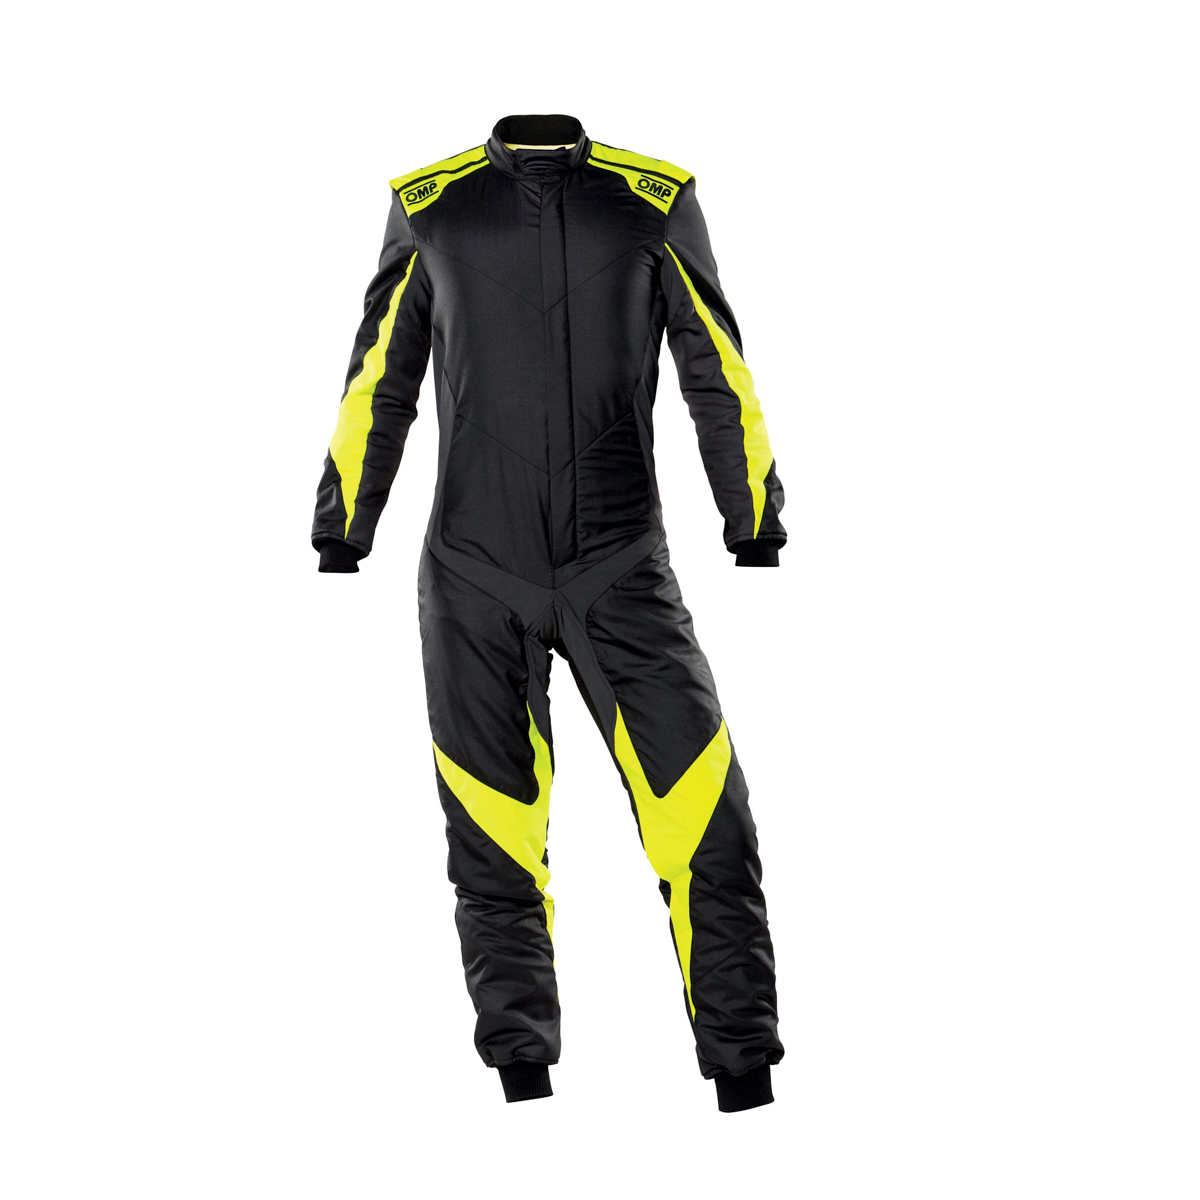 OMP Racing IA01859E17860 Driving Suit, Tecnica Evo, 1-Piece, SFI 3.2A/5, FIA Approved, Double Layer, Fire Retardant Fabric, Black / Fluorescent Yellow, Size 60, Each